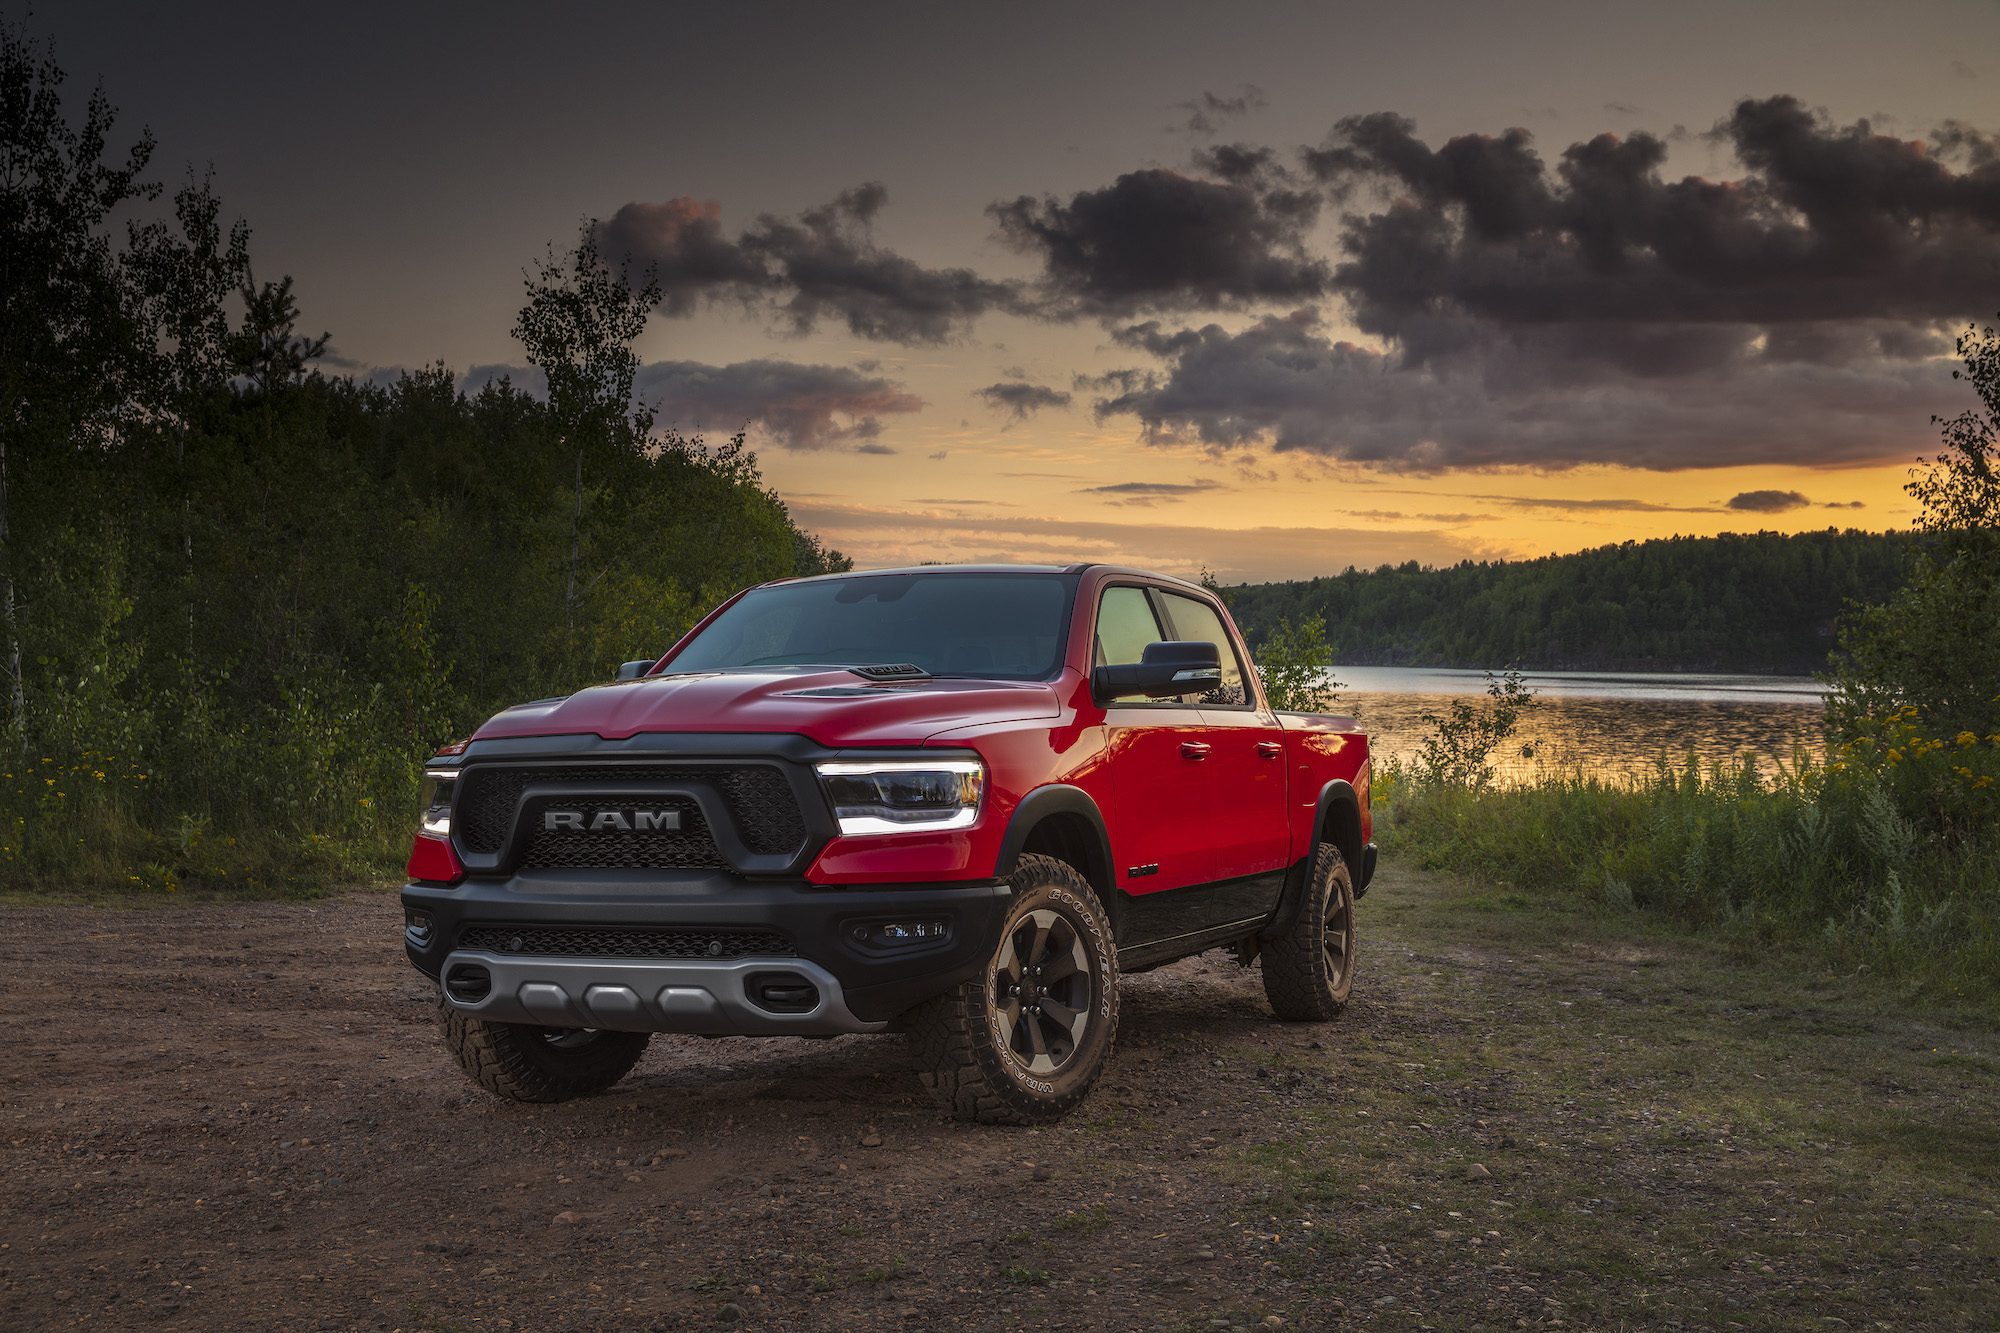 Ram’s electric pickup concept will be revealed in less than a month